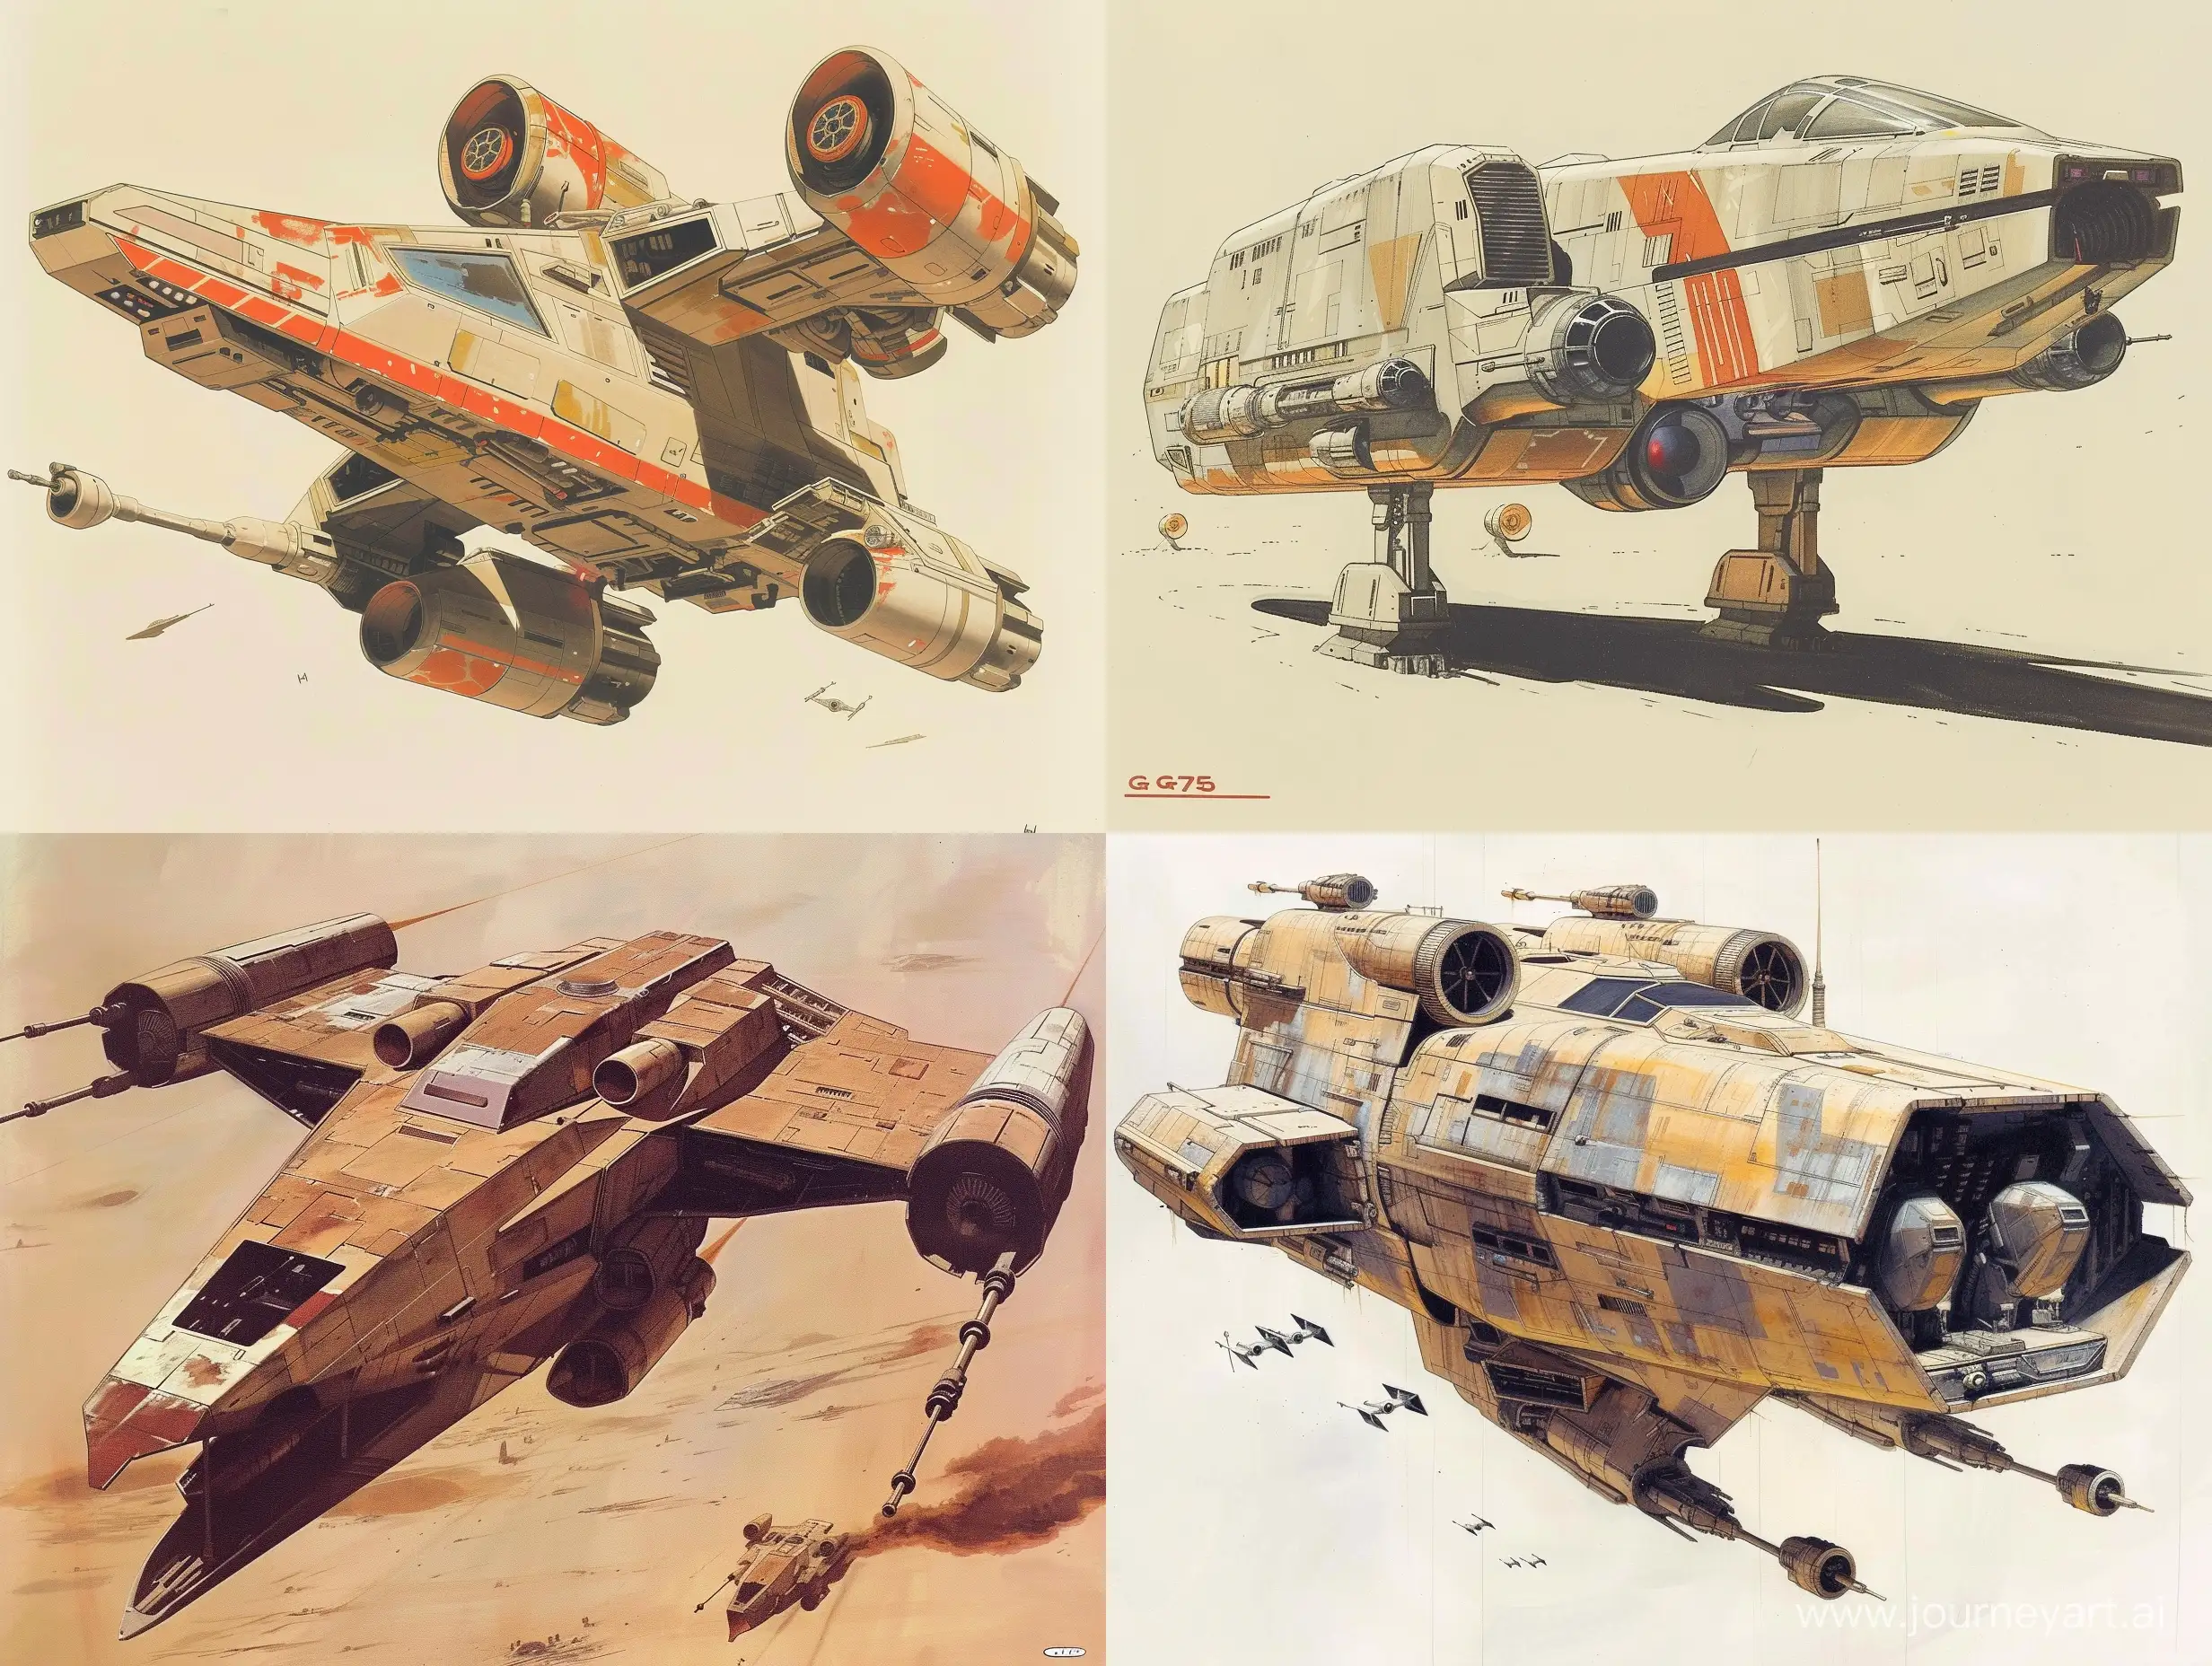 Retro-Science-Fiction-Art-GR75-Rebel-Transport-in-Colorful-Star-Wars-Style